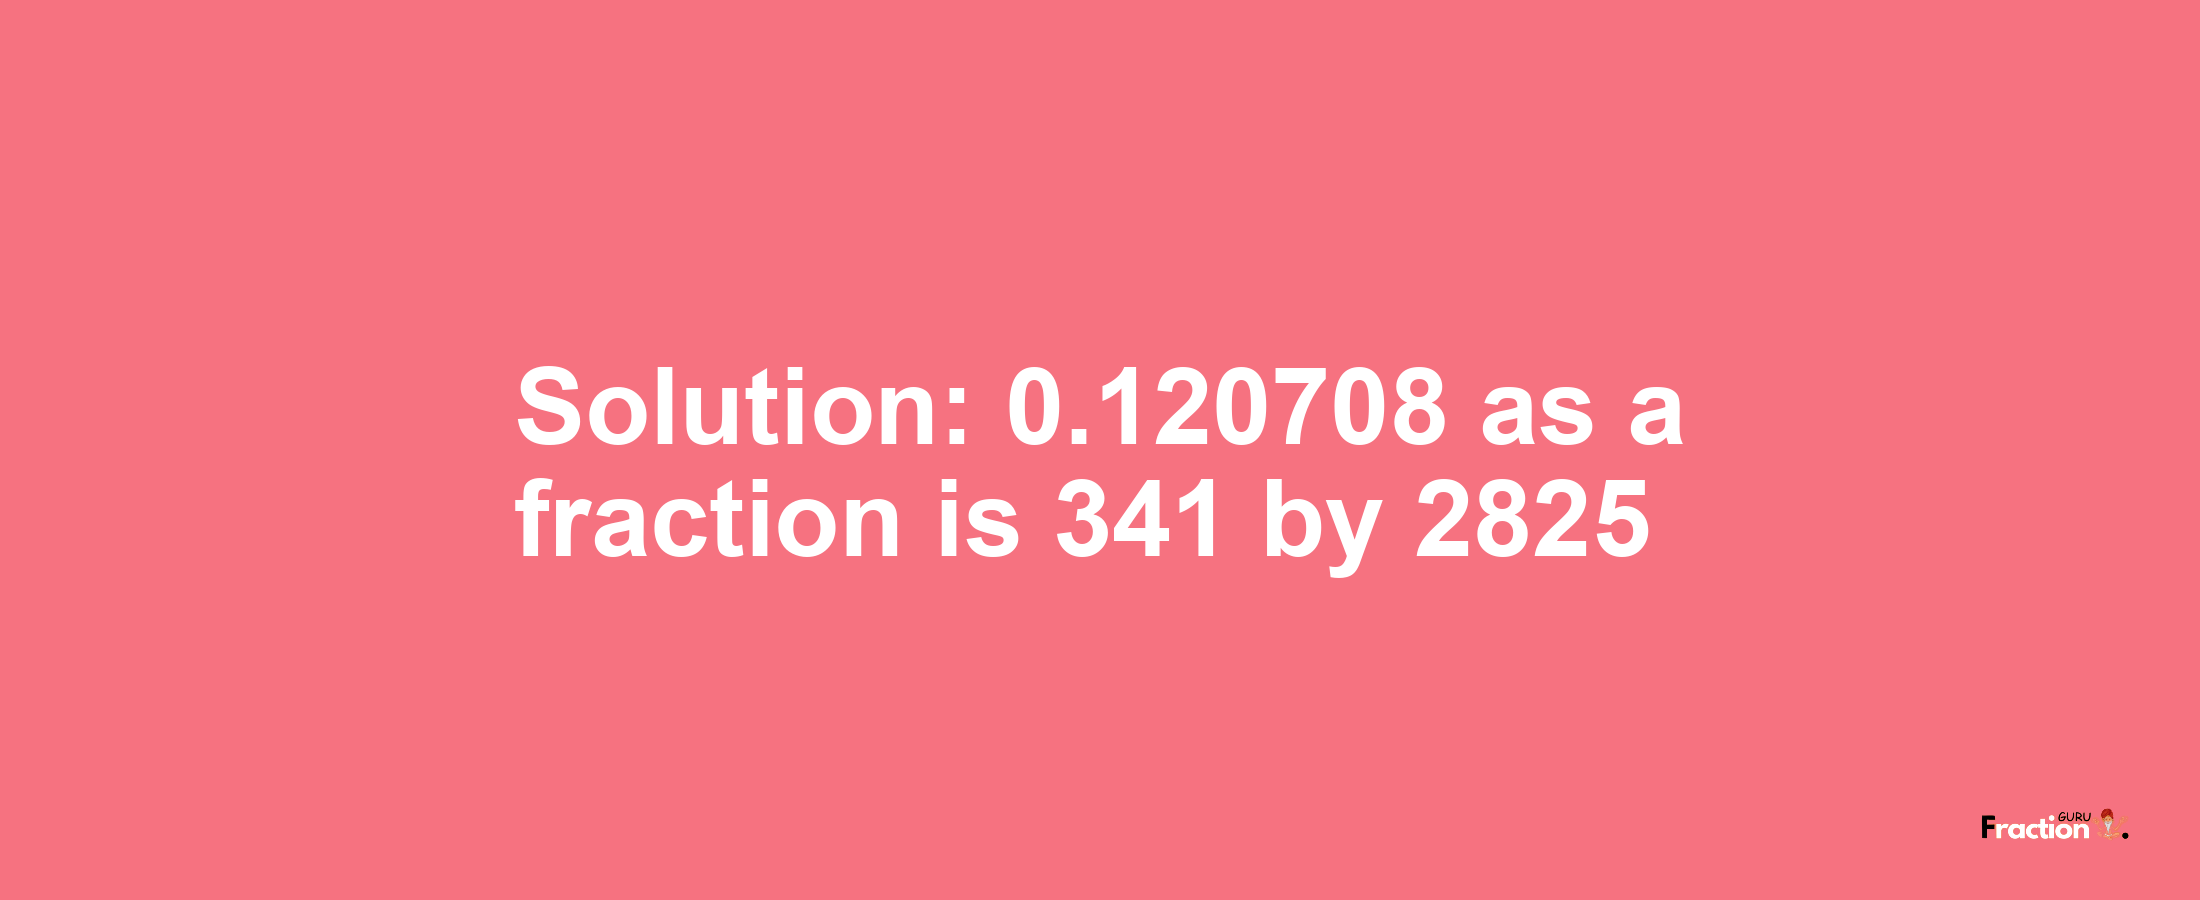 Solution:0.120708 as a fraction is 341/2825